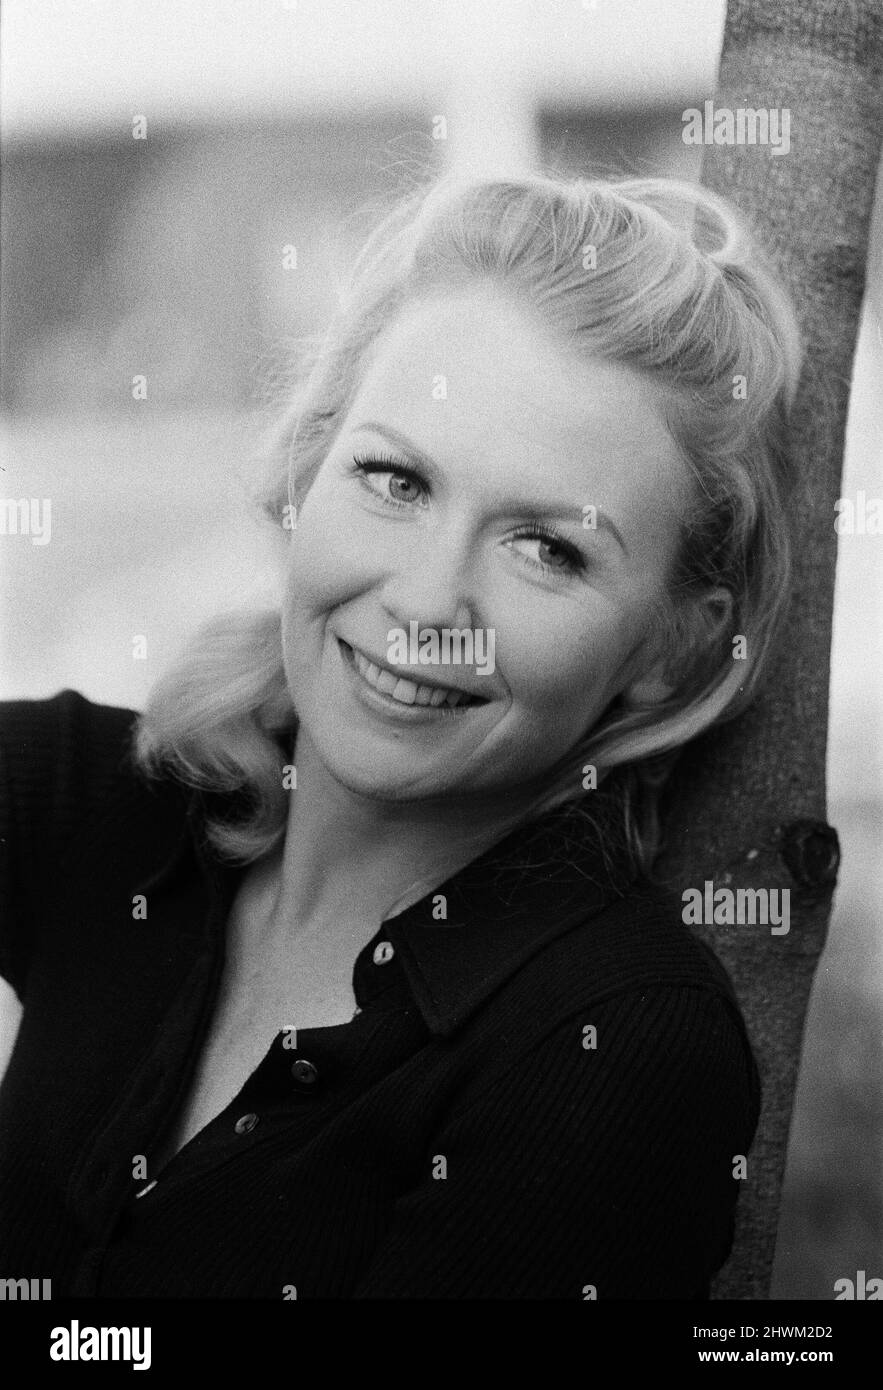 Actress Juliet Mills at the Inn on the Park to promote her new film 'Avanti!'. 15th May 1973. Stock Photo